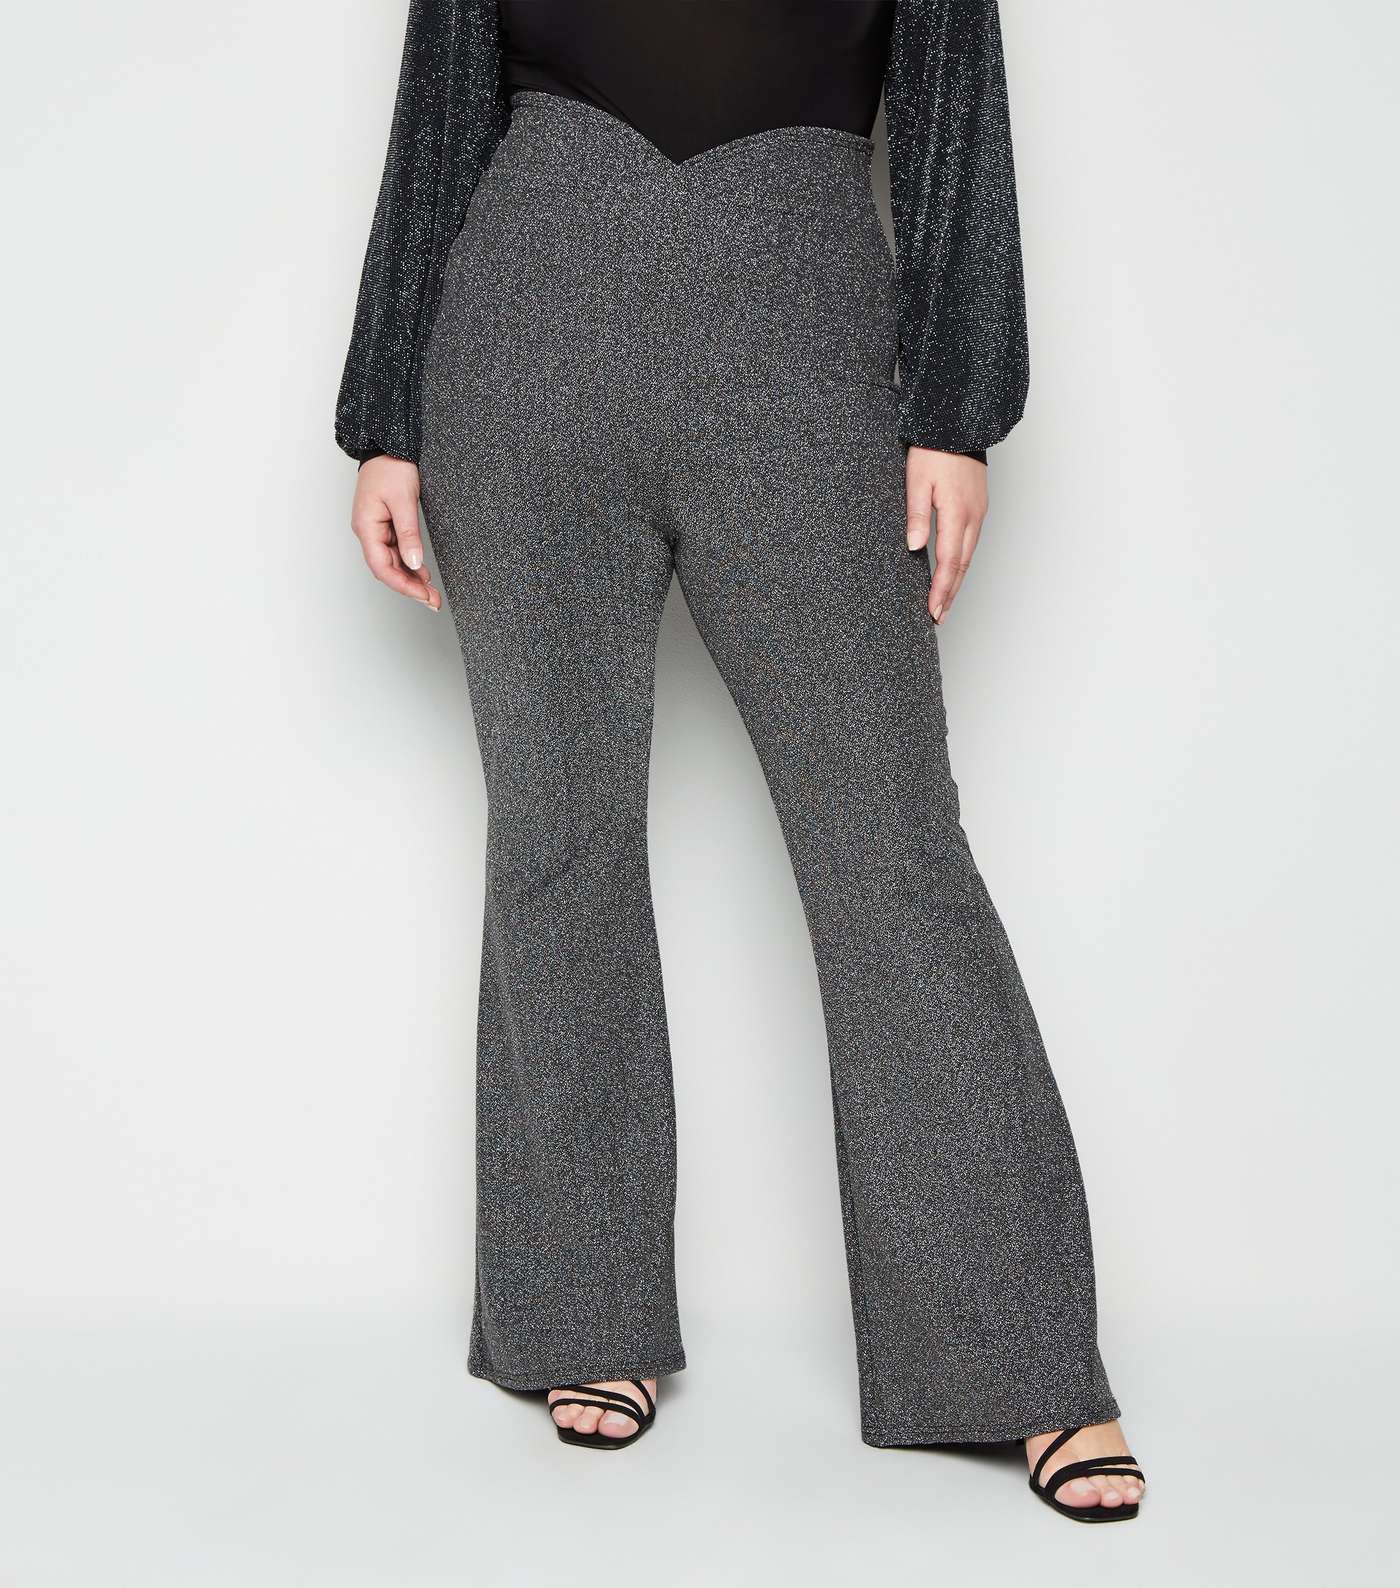 Just Curvy Black Shimmer Flared Trousers Image 2